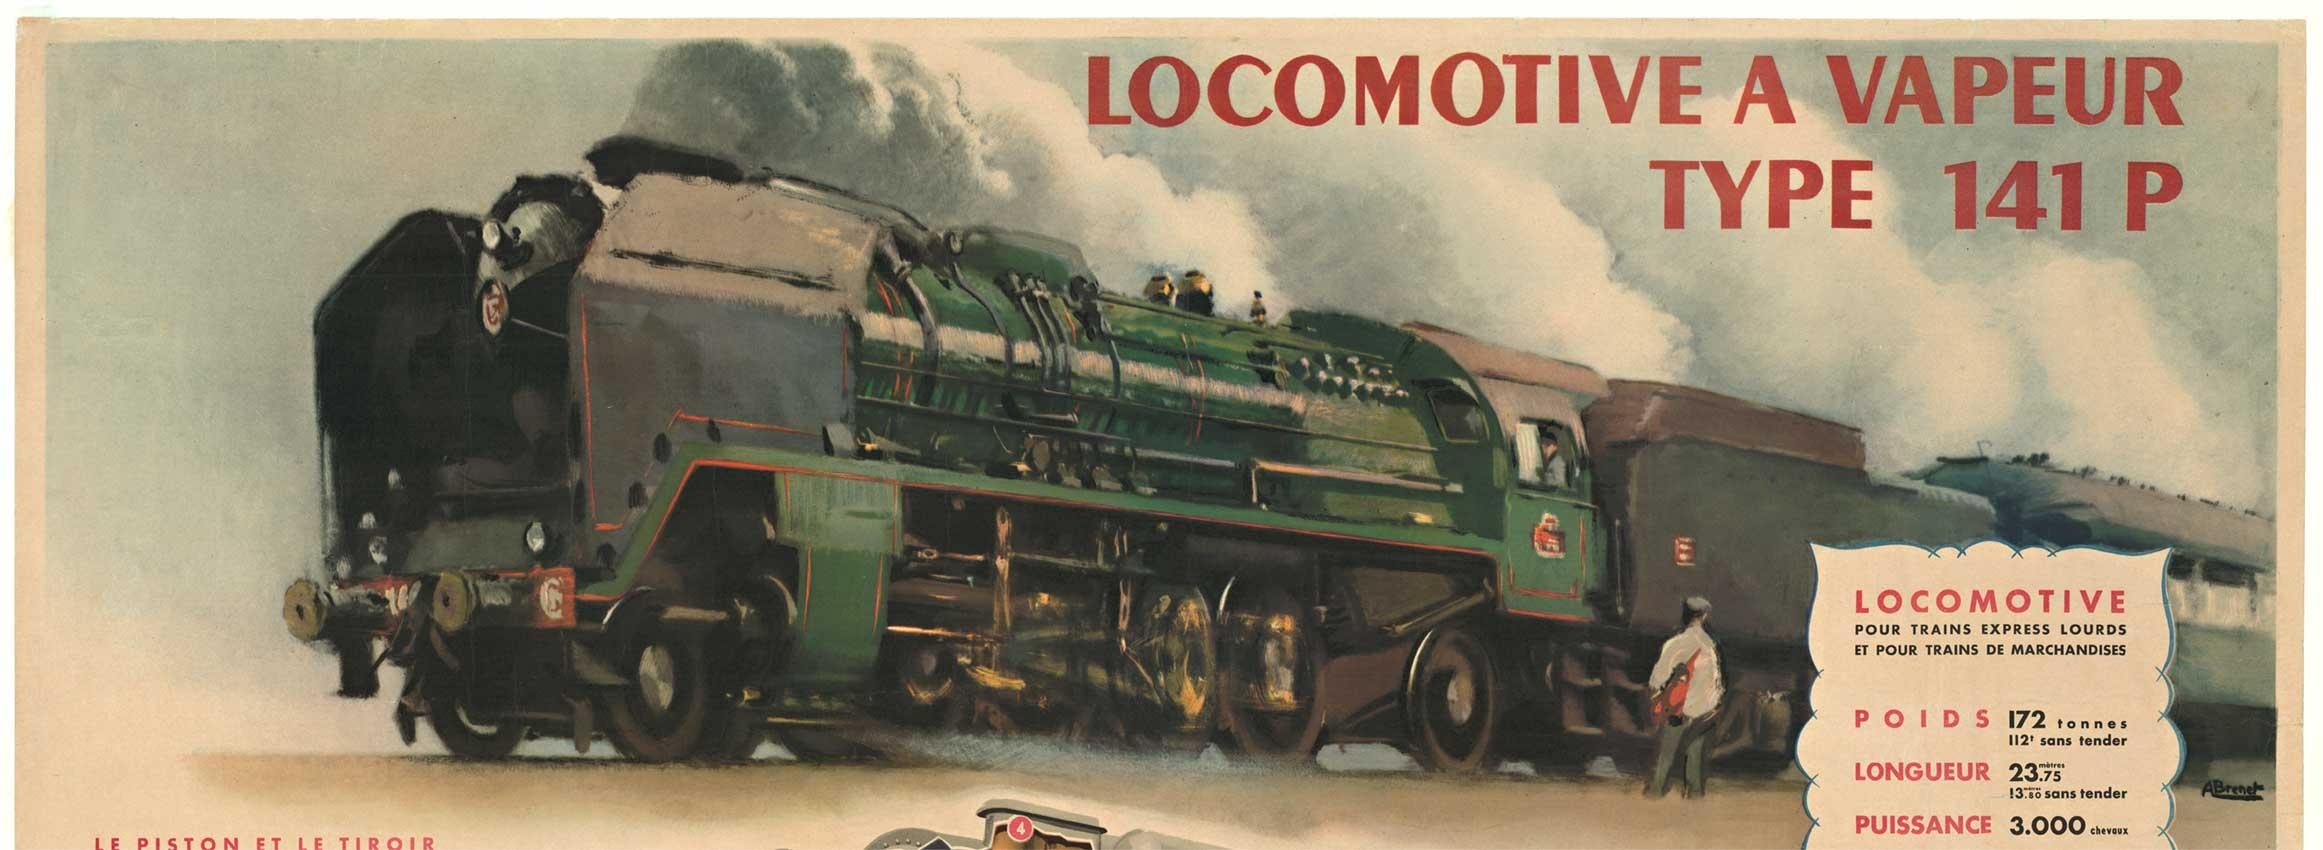 Original poster:  LOCOMOTIVE A VAPEUR.   Type 141 P. 
Artist:  A. Bouvry and Albert Brenert   Horizontal railway poster that has been archival linen backed, ready to frame.   Very good condition.

Albert Brenet was known for his railway and railroad